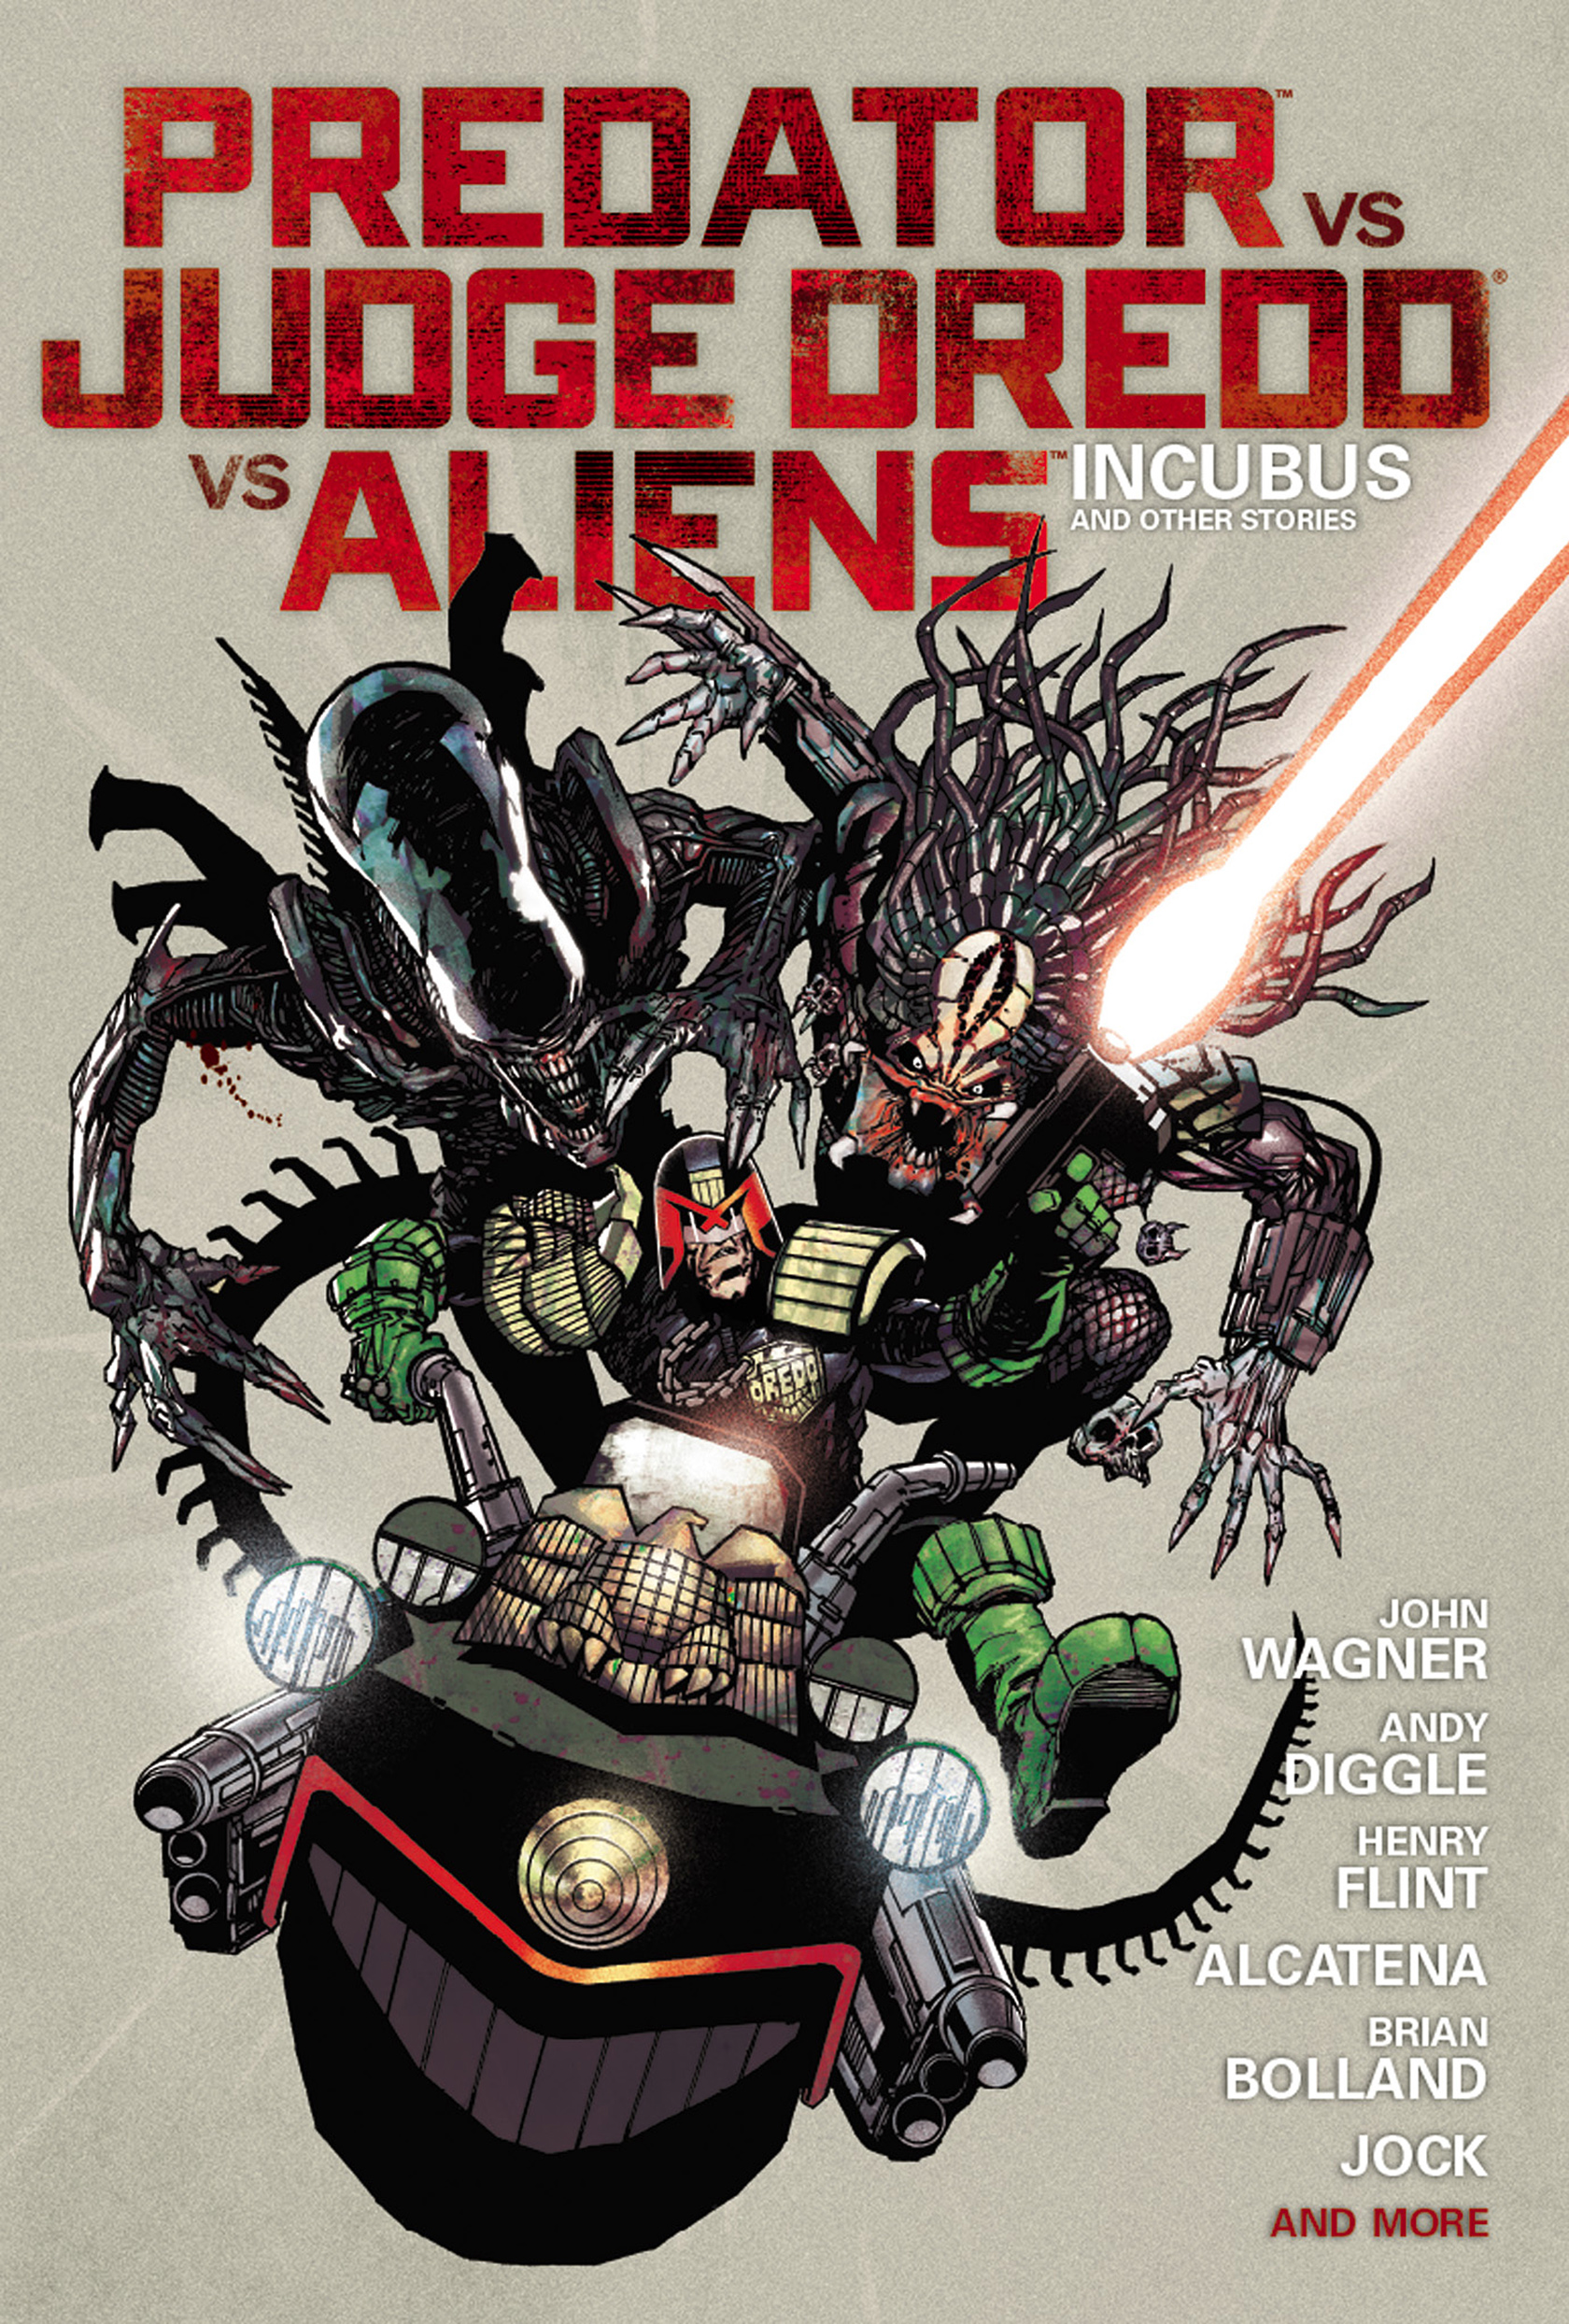 Read online Predator vs. Judge Dredd vs. Aliens: Incubus and Other Stories comic -  Issue # TPB (Part 1) - 1